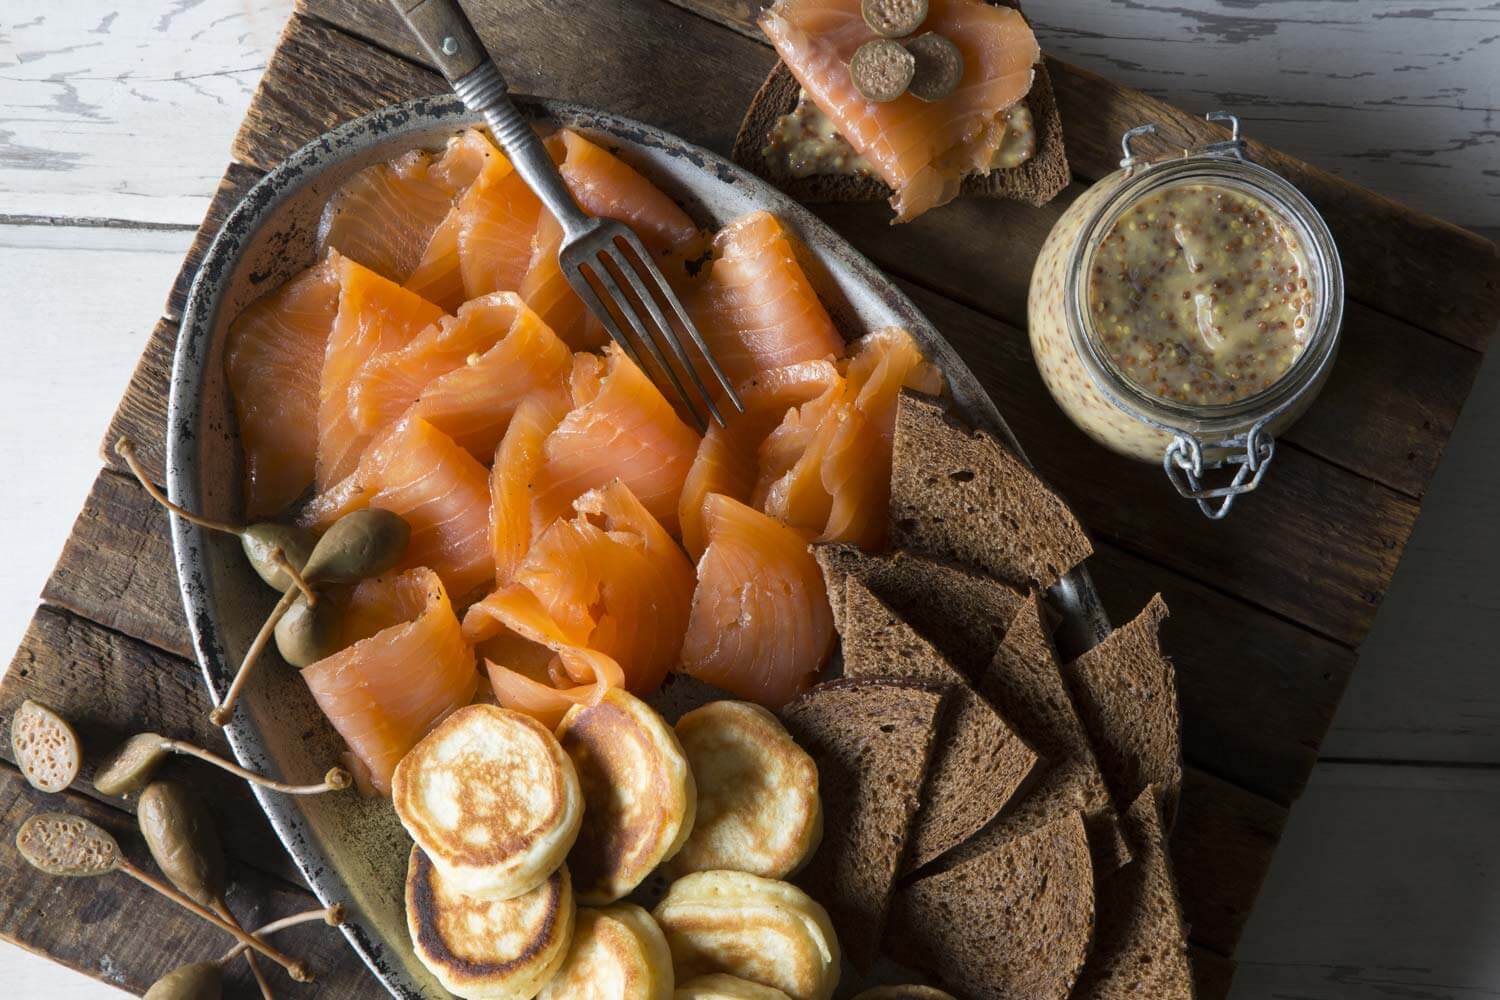 A plate with salmon, crackers and a jar of mustard.